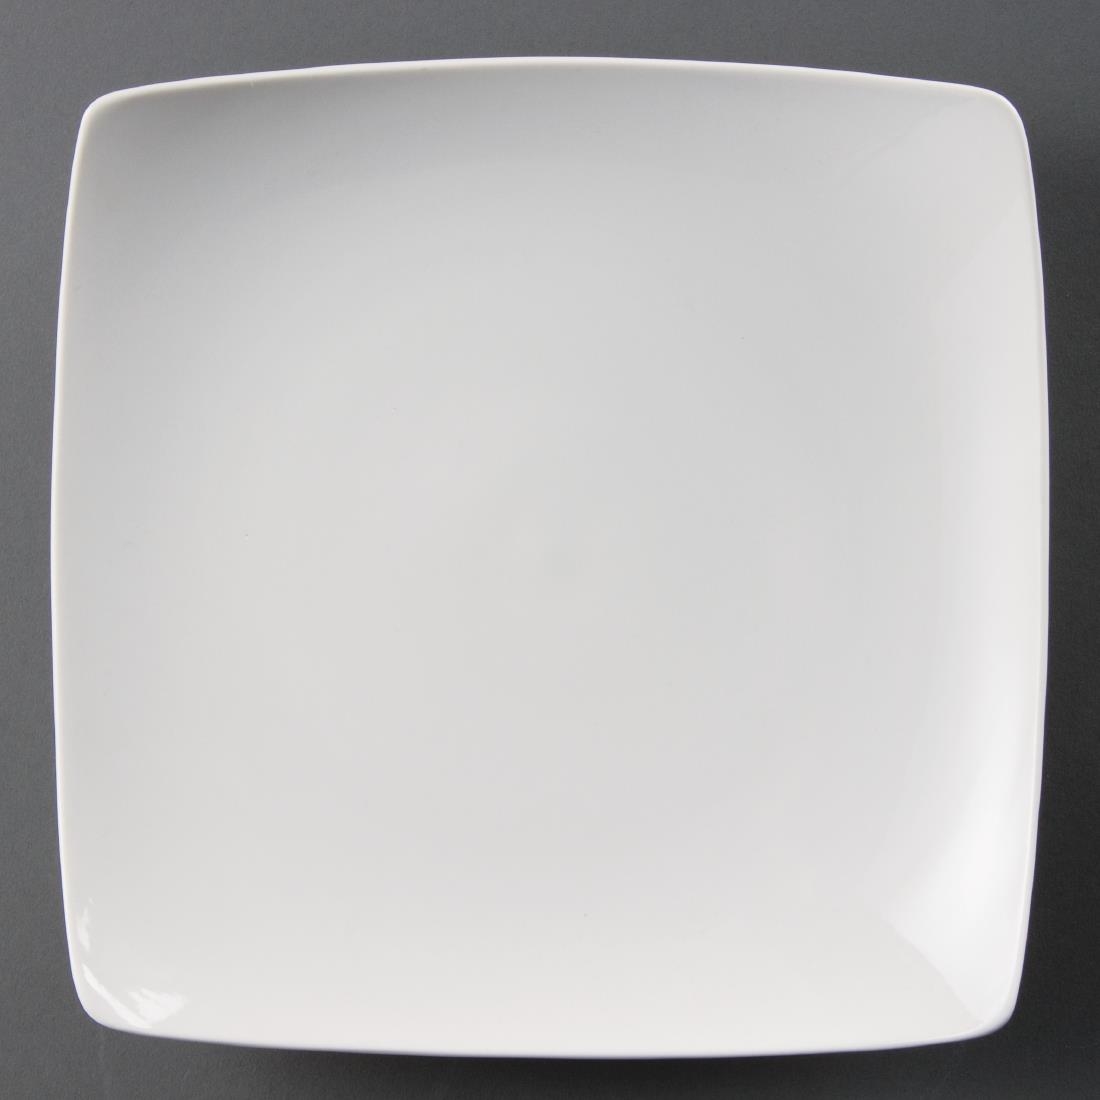 Square Bowled Plate